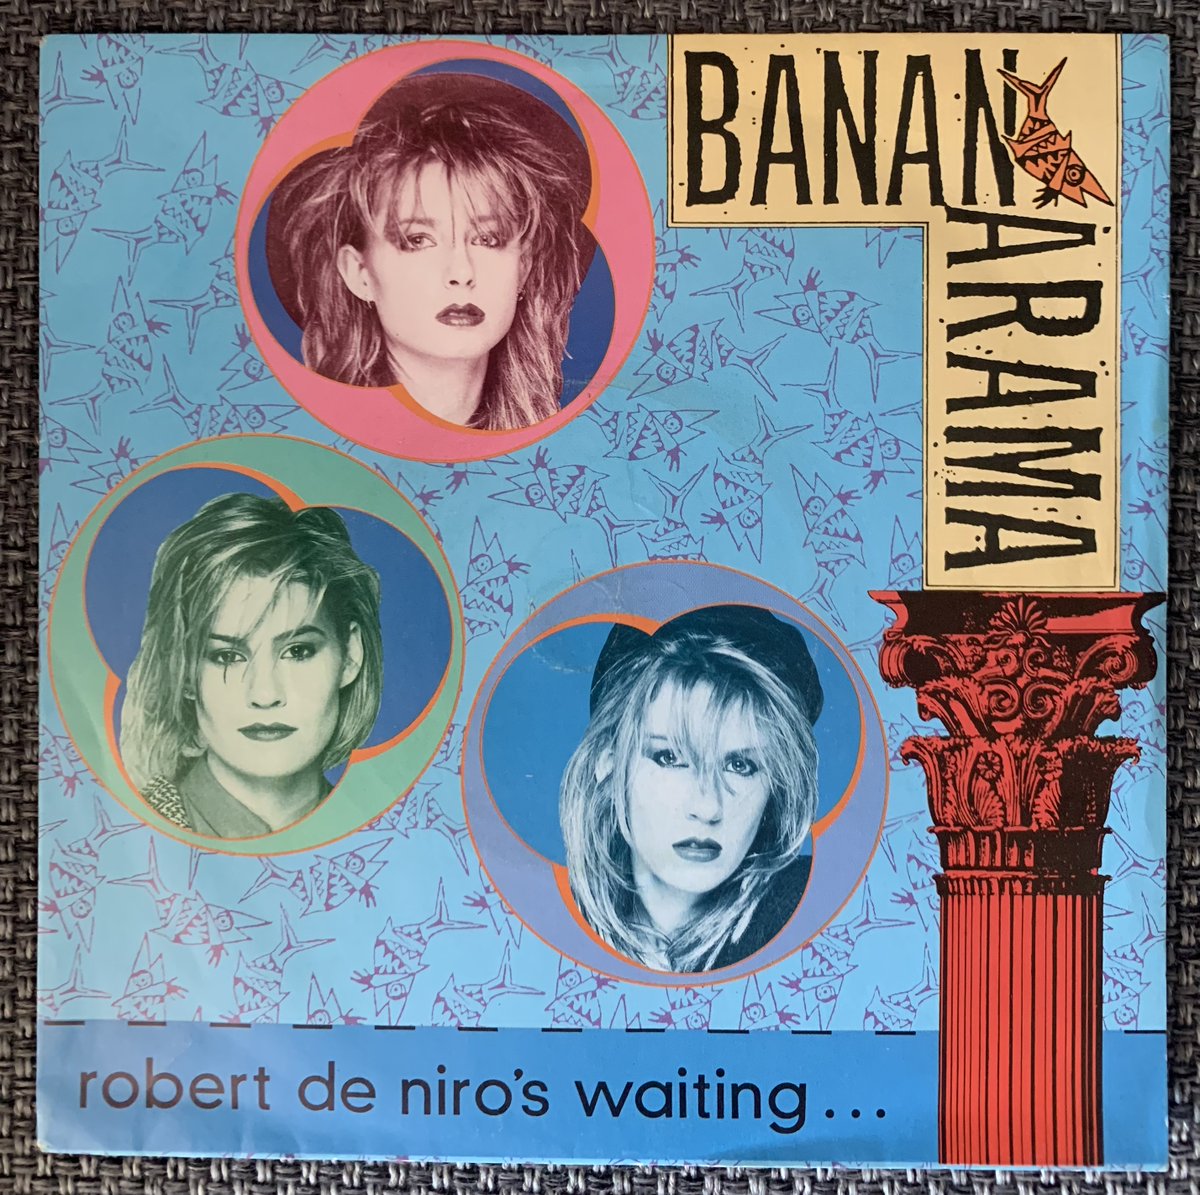 I was already a fan of Bananarama when their first few singles became hits in 1982, but this is the song that made me the huge fan I still am today. It's a flawless pop song, that I never seem to grow tired of. #bananarama #saradallin #kerenwoodward #siobhanfahey